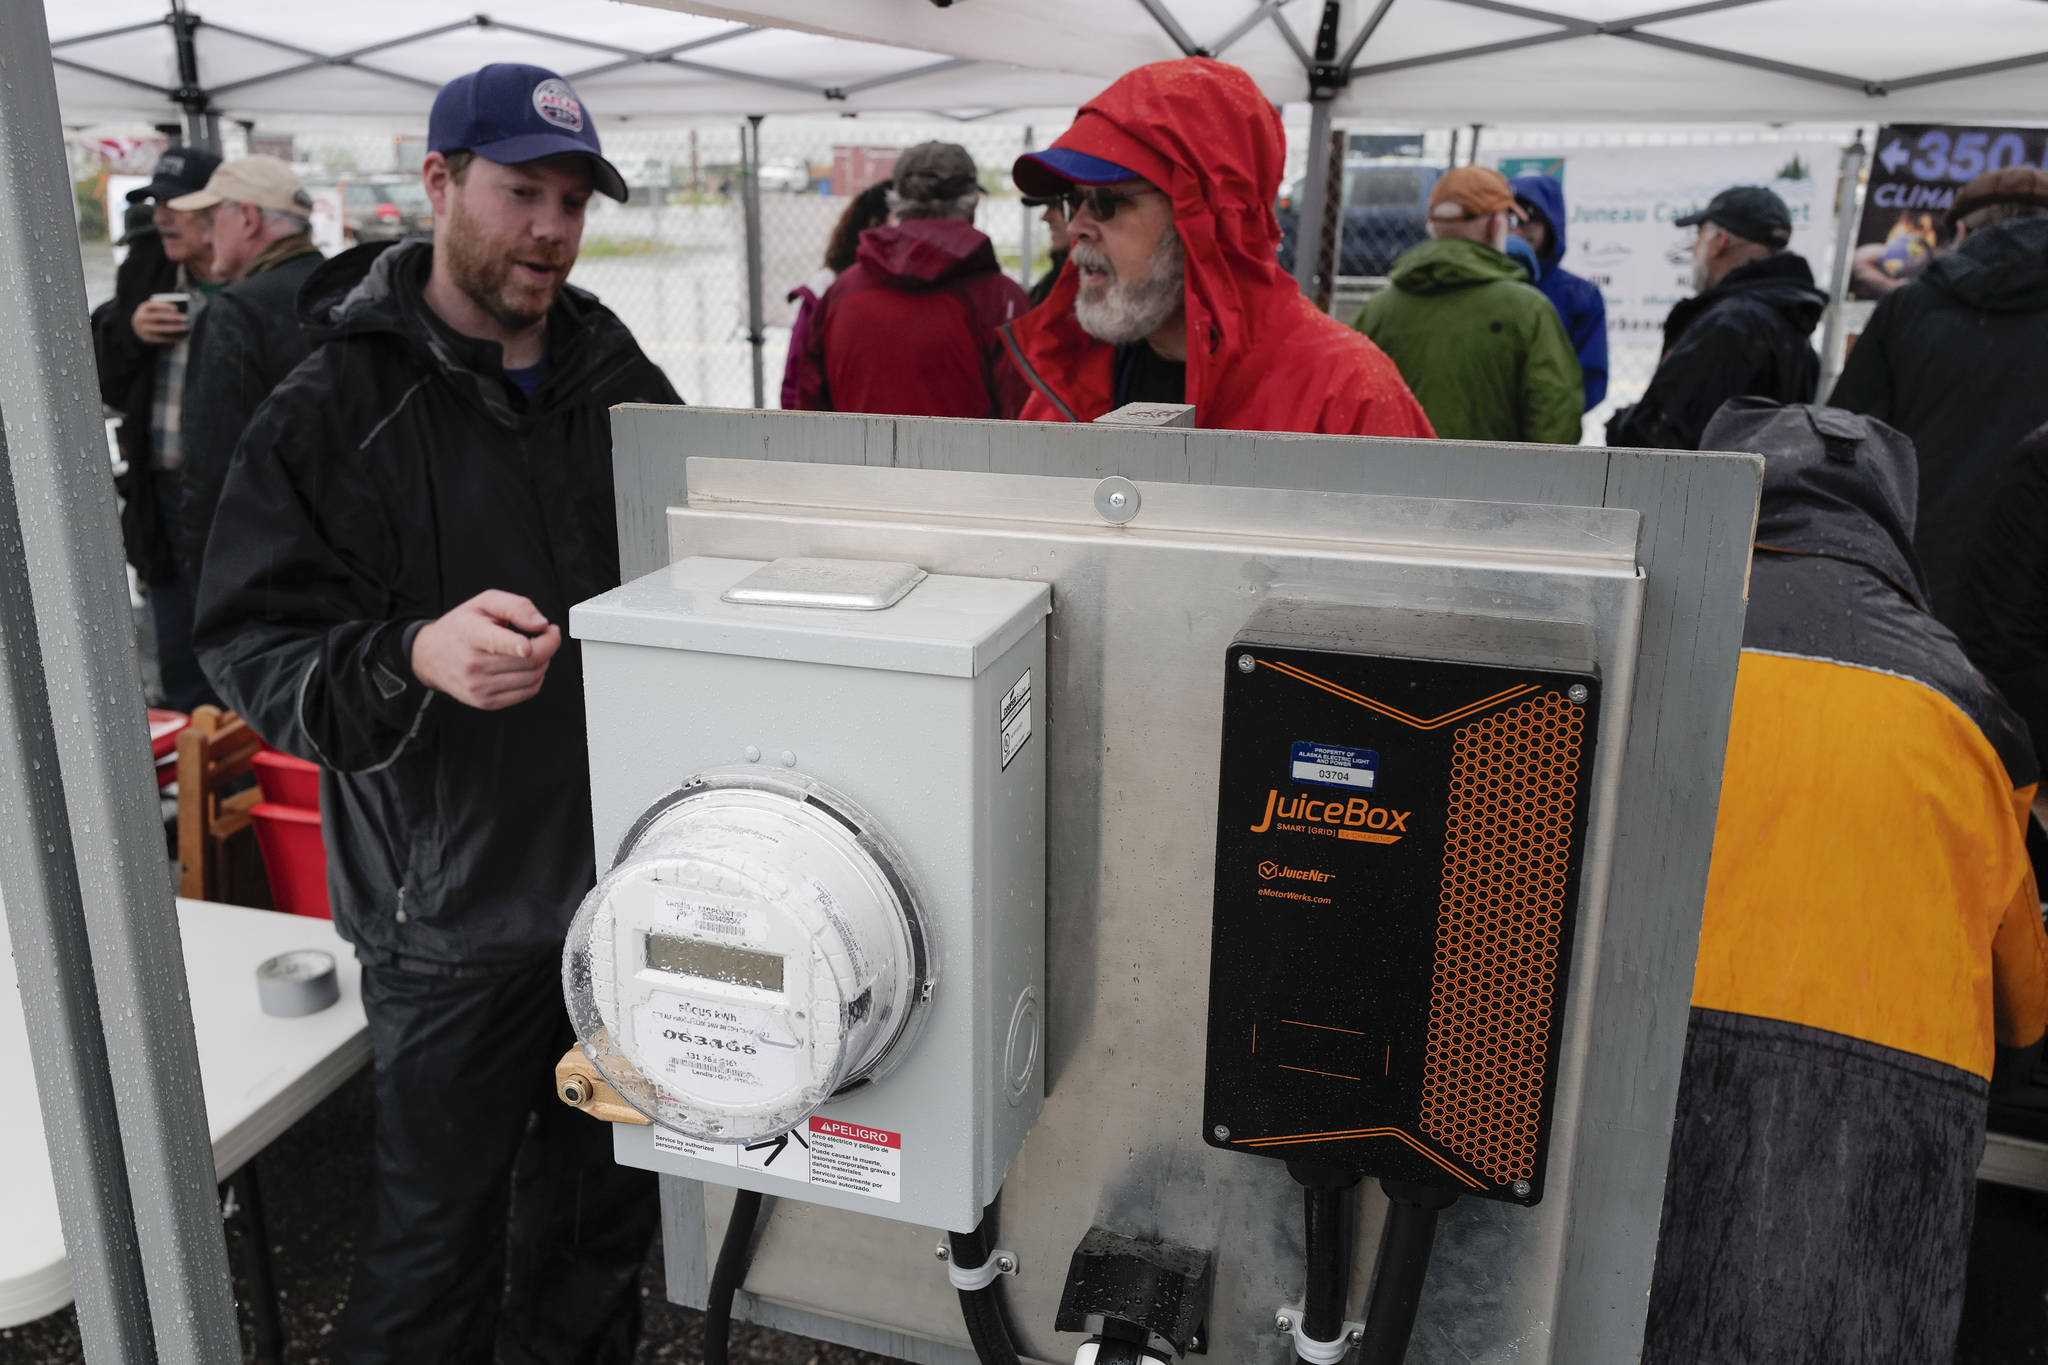 Alec Mesdag, of AEL&P, left, talks to Sean Edwards about their reduced rates and portable charging station for electric vehicles as Juneau residents meet for the 6th Annual Electric Vehicle Juneau Roundup on Saturday, Sept. 21, 2019. (Michael Penn | Juneau Empire)